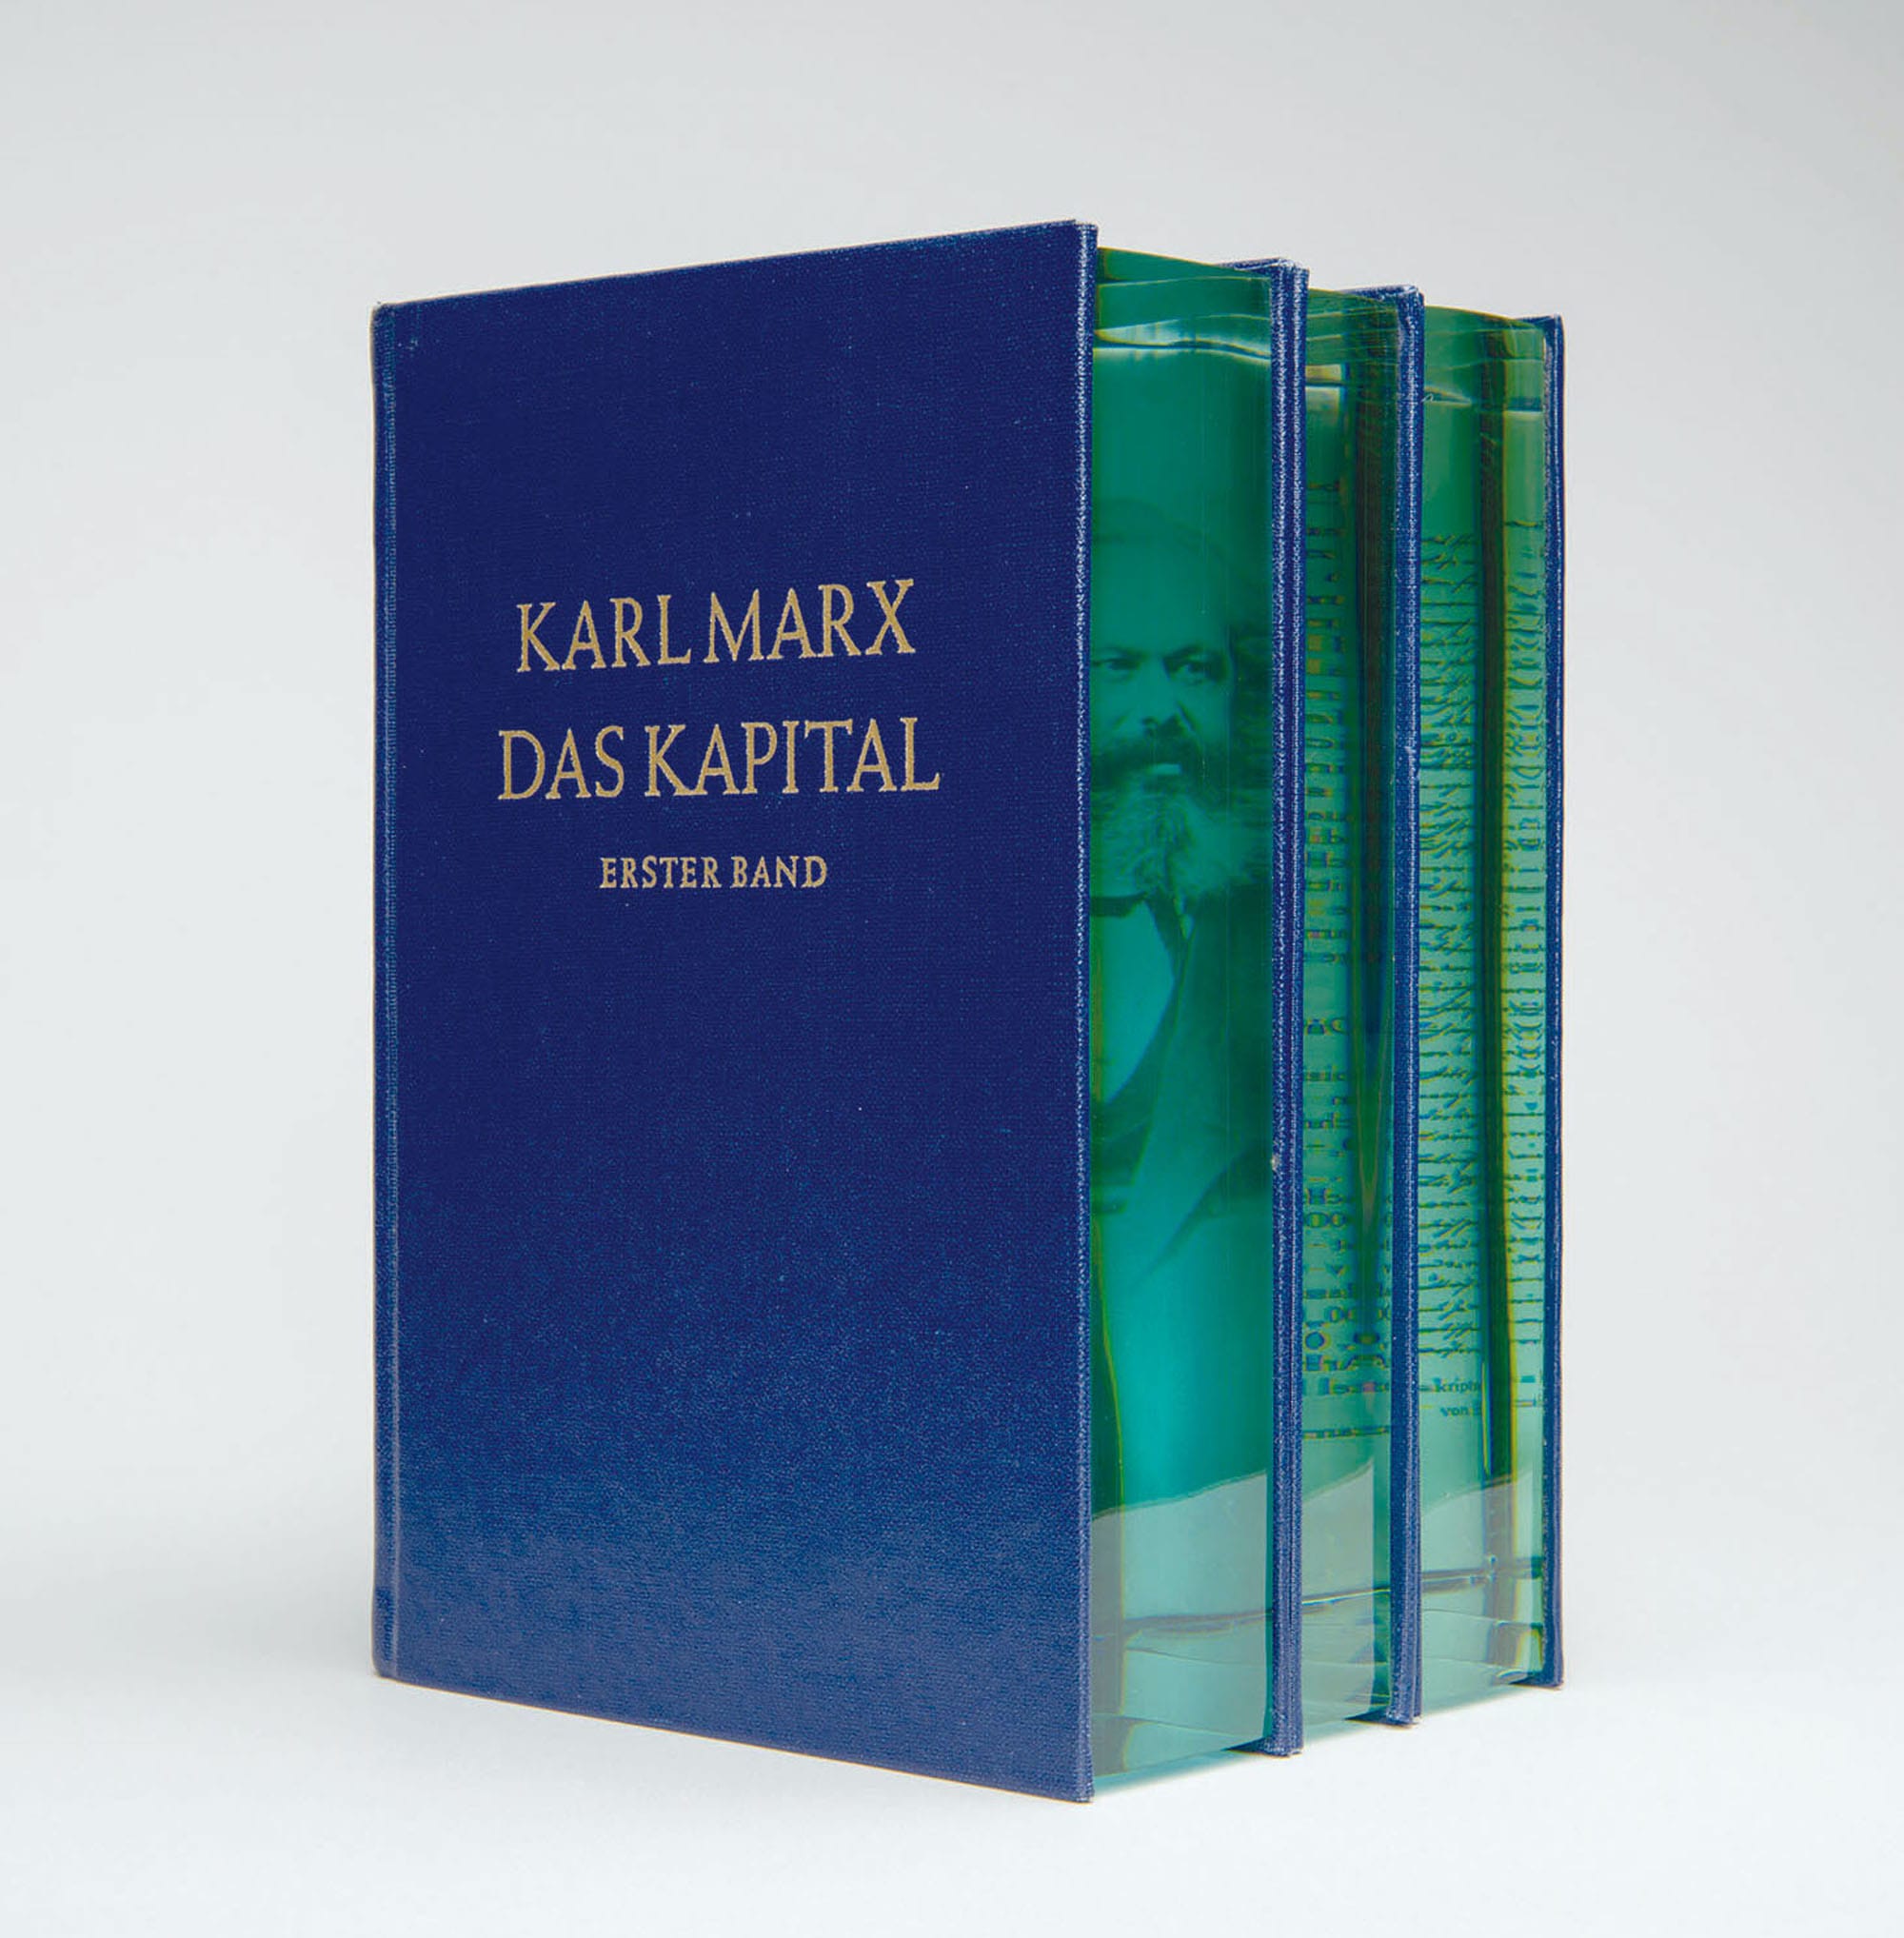 Karl Marx's "Das Kapital" including an embedded section of layered of aquamarine glass